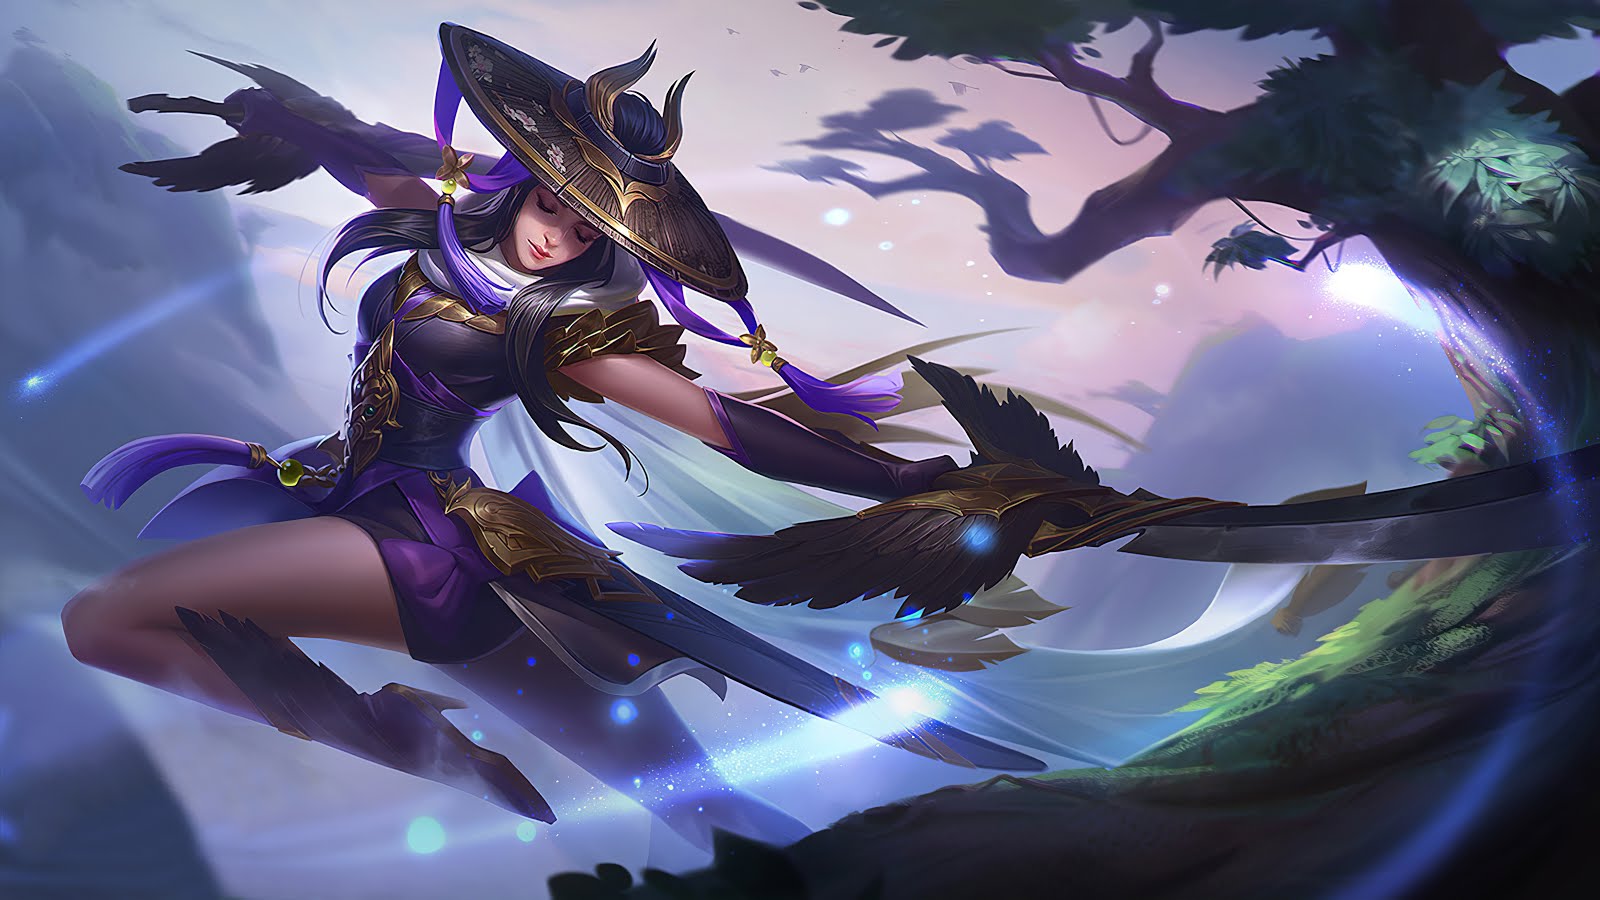 Mobile Legends Wallpapers HD: FANNY WALLPAPERS FULL HD